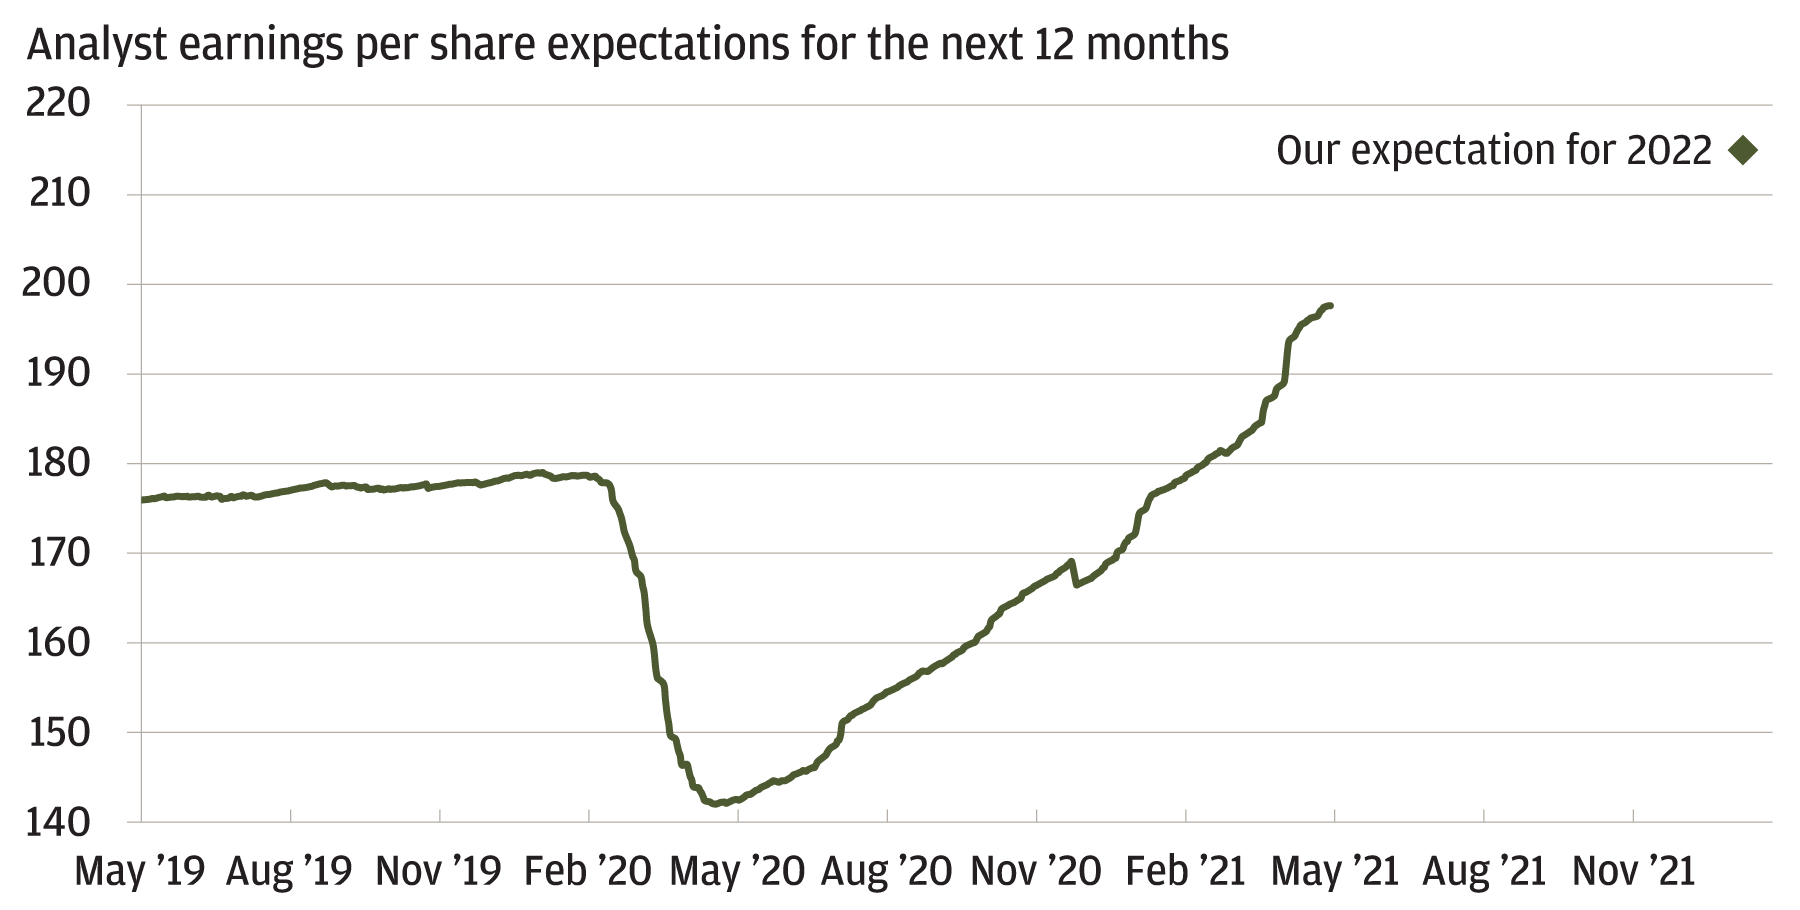 Chart 7: Analyst earnings per share expectations for the next 12 months